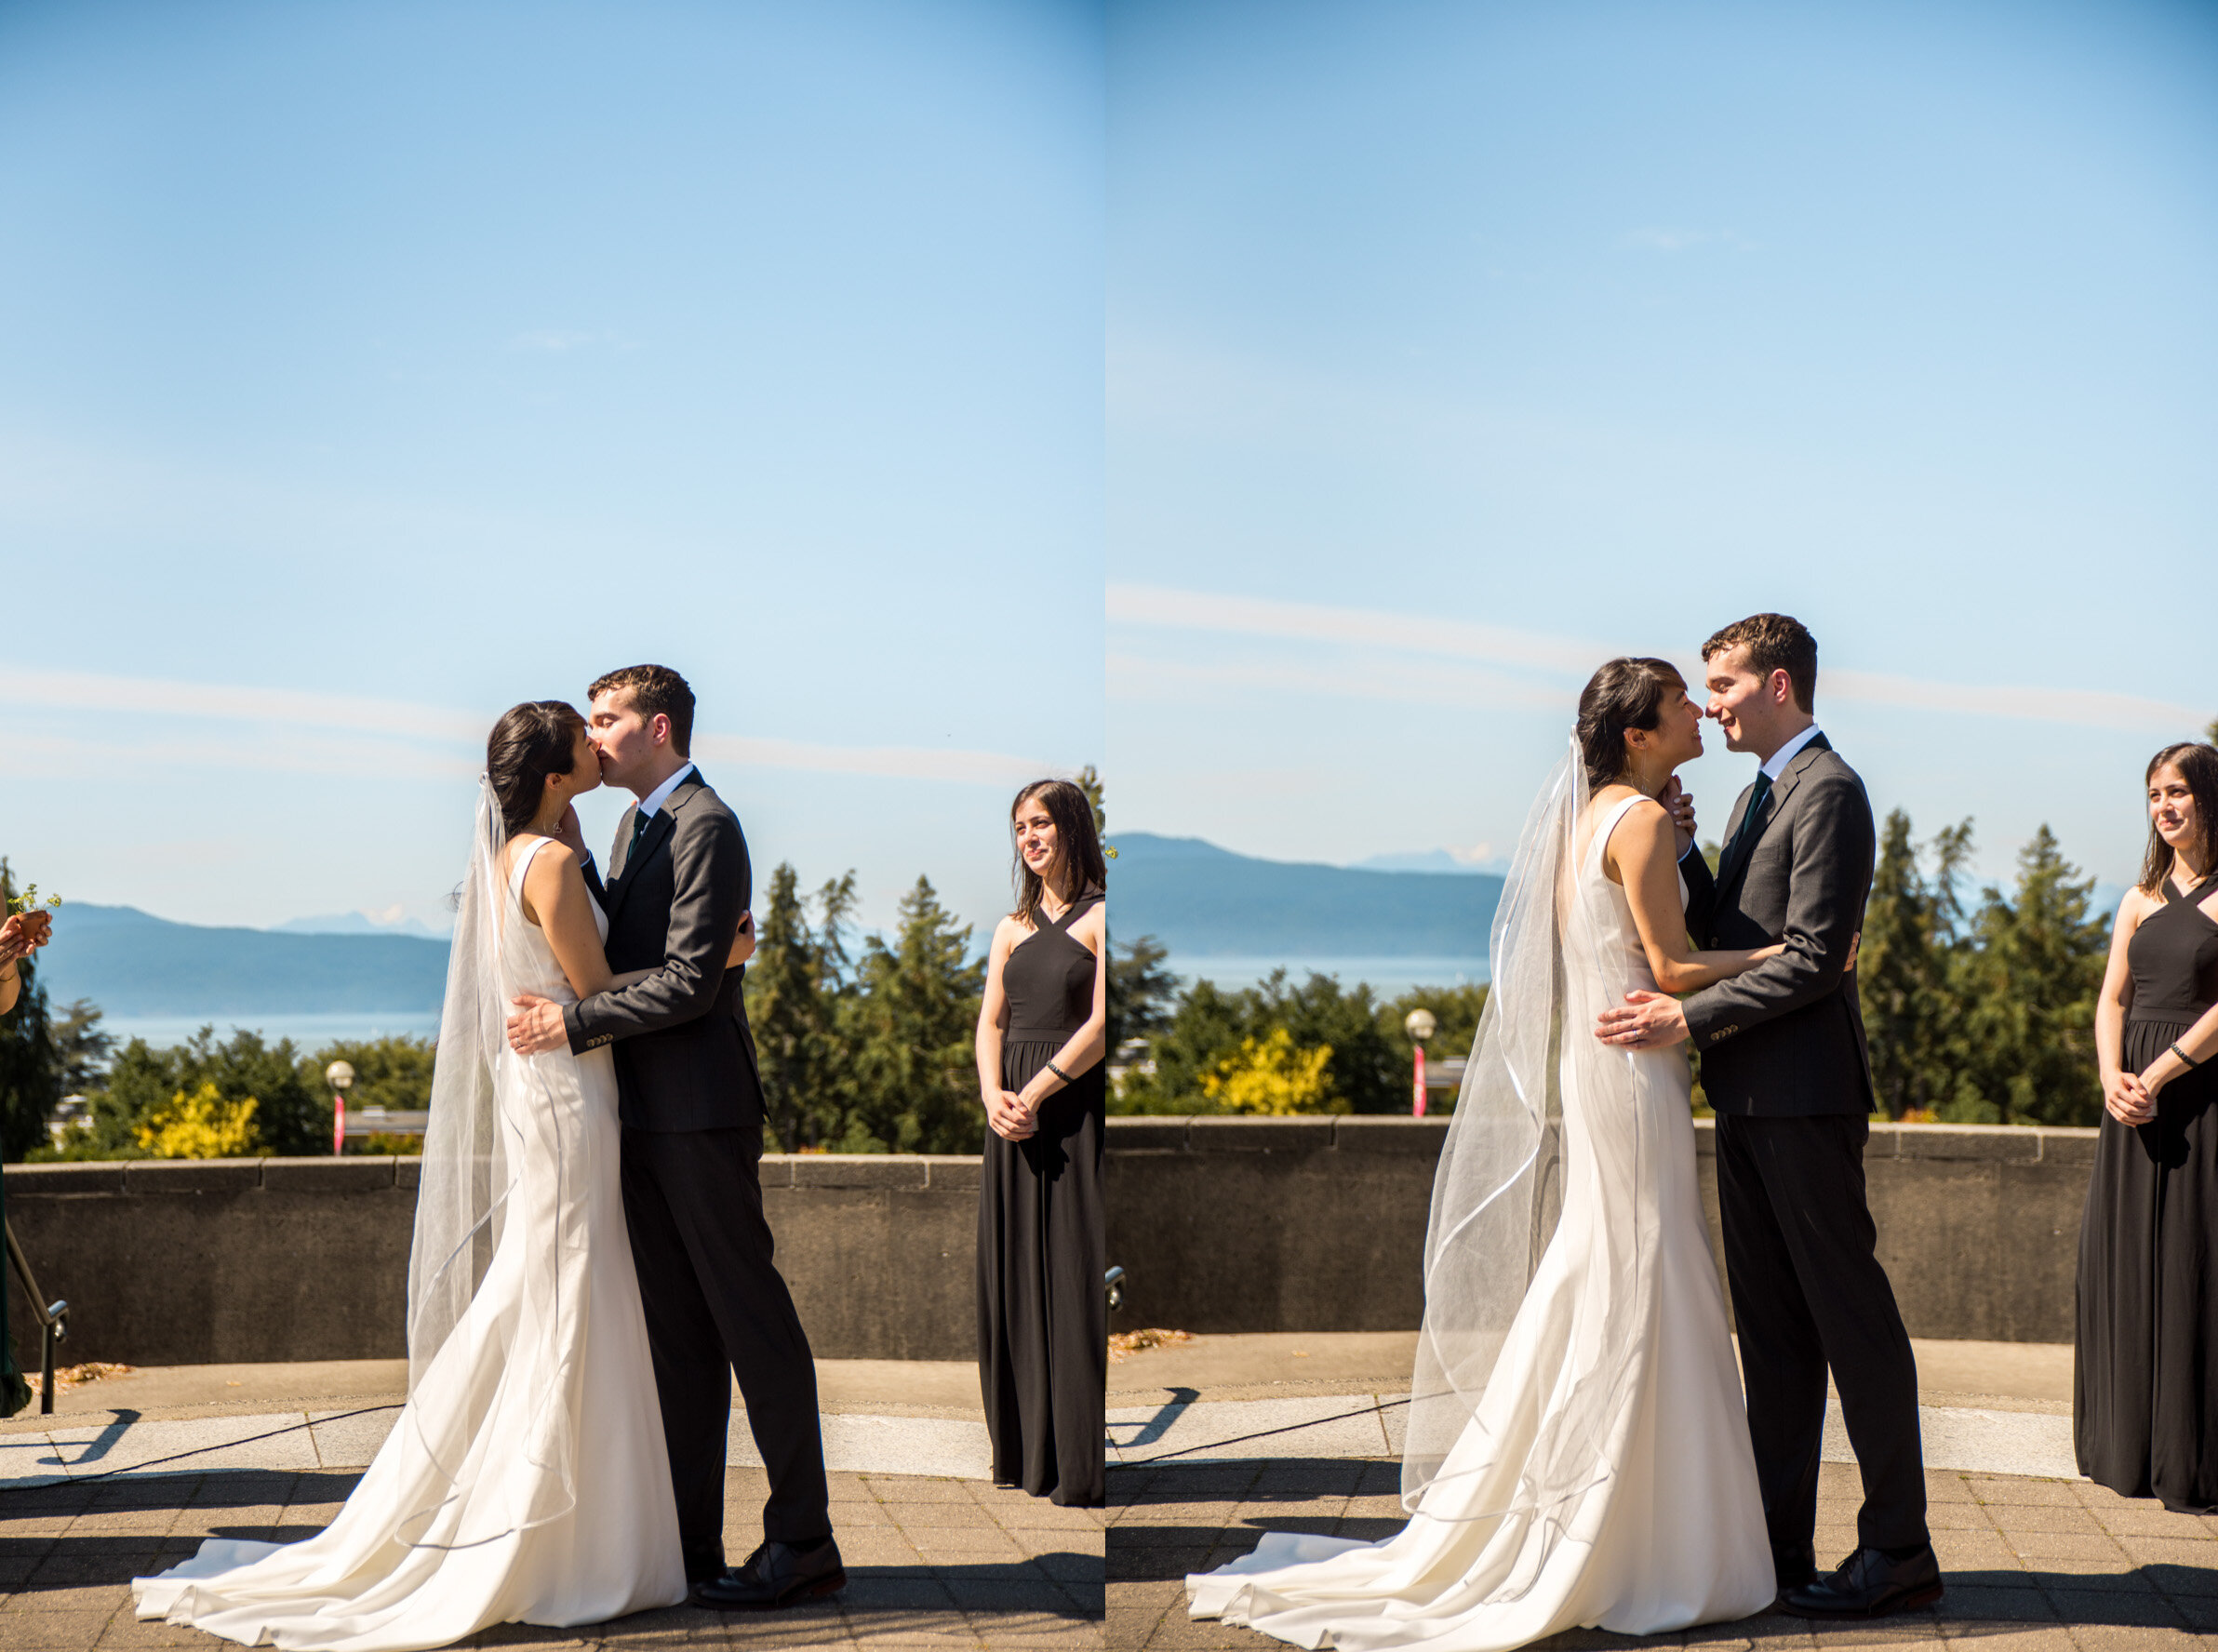 Bride and Groom share first kiss at wedding ceremony in UBC Rose Garden Vancouver, B.C.